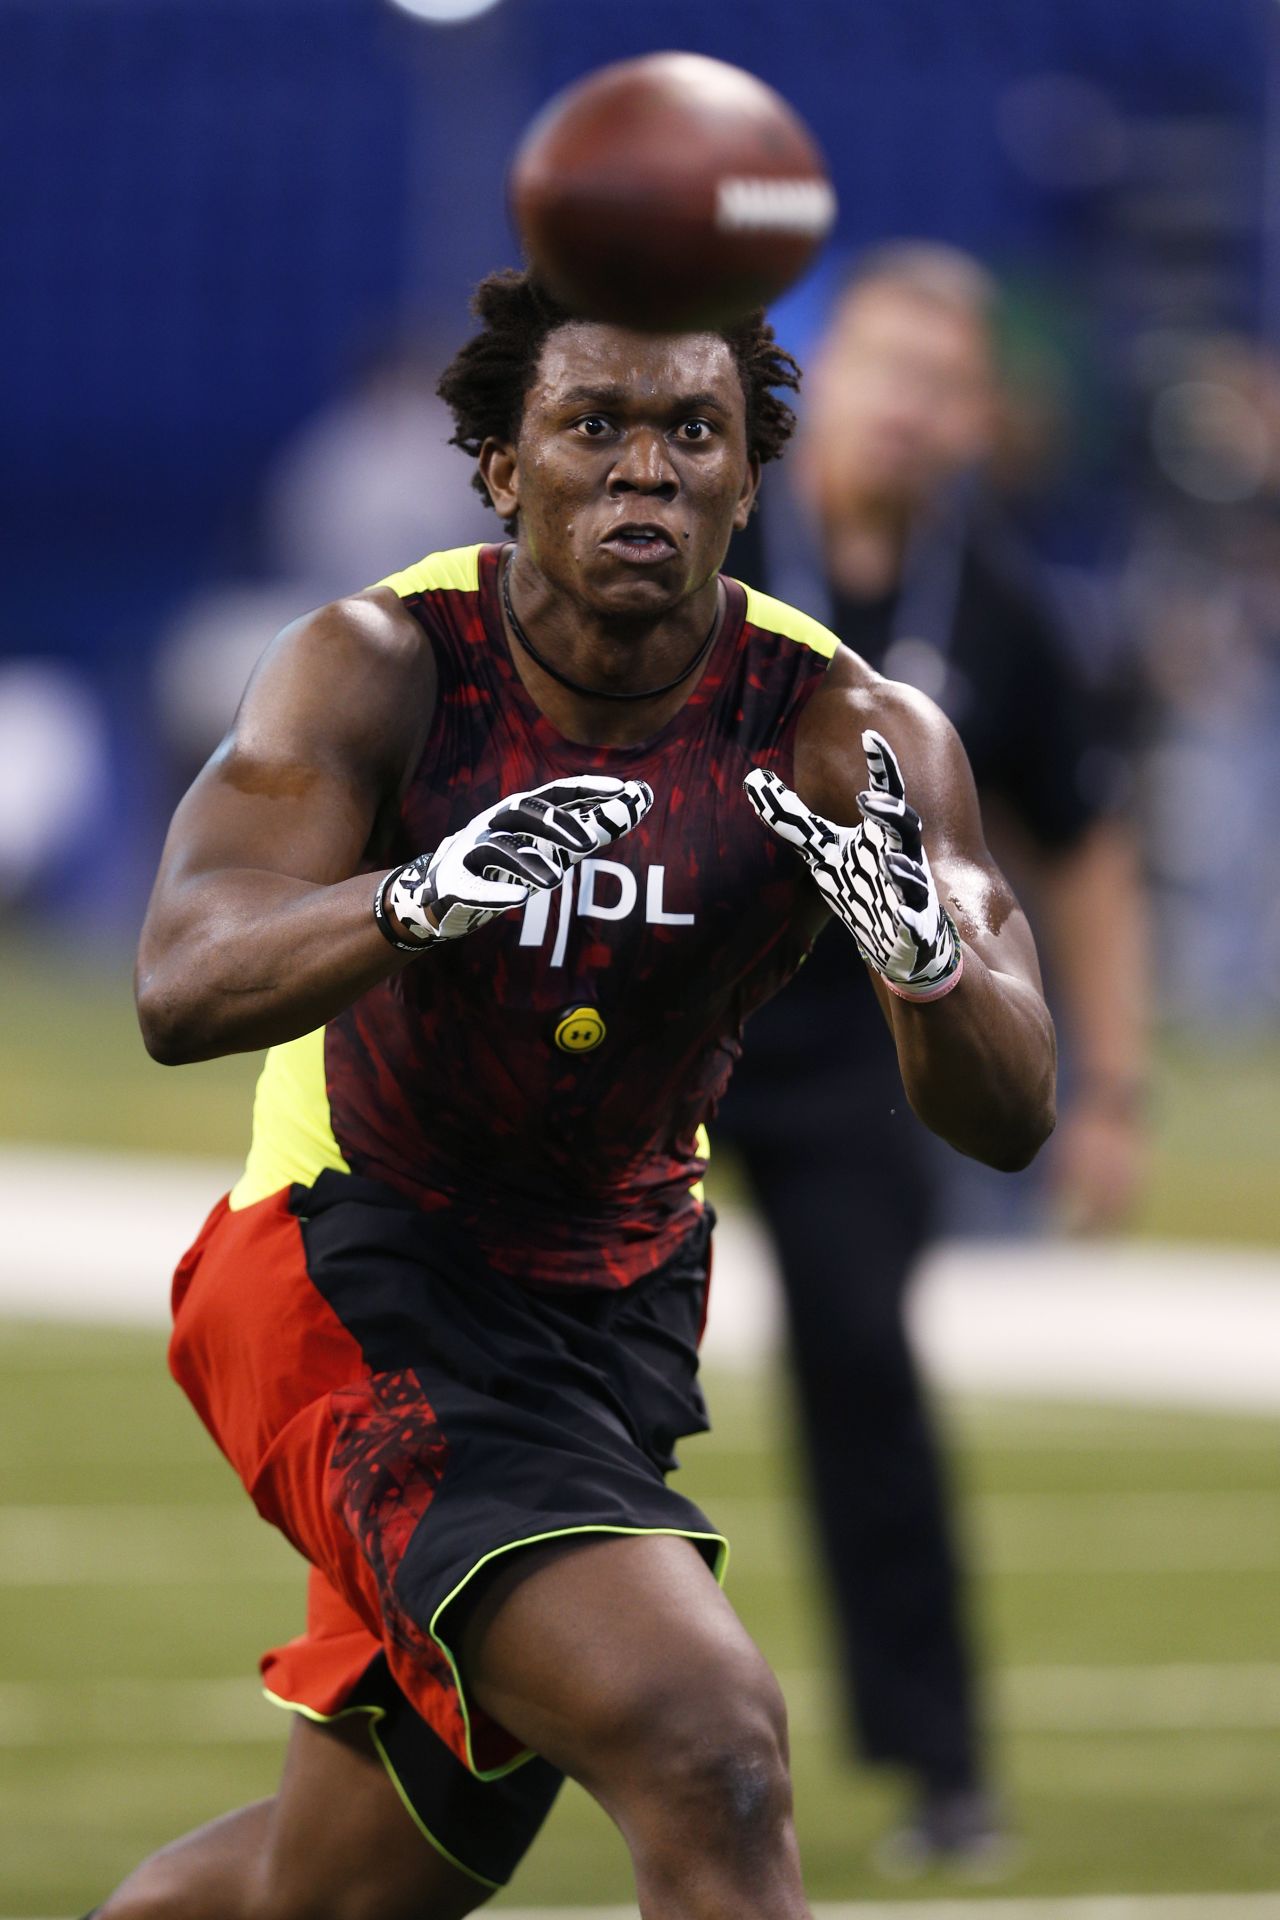 Last year a record five non-Americans were drafted higher than the third round. Ghanaian defensive end Ziggy Ansah of Brigham Young University is one of the favored international players this year.